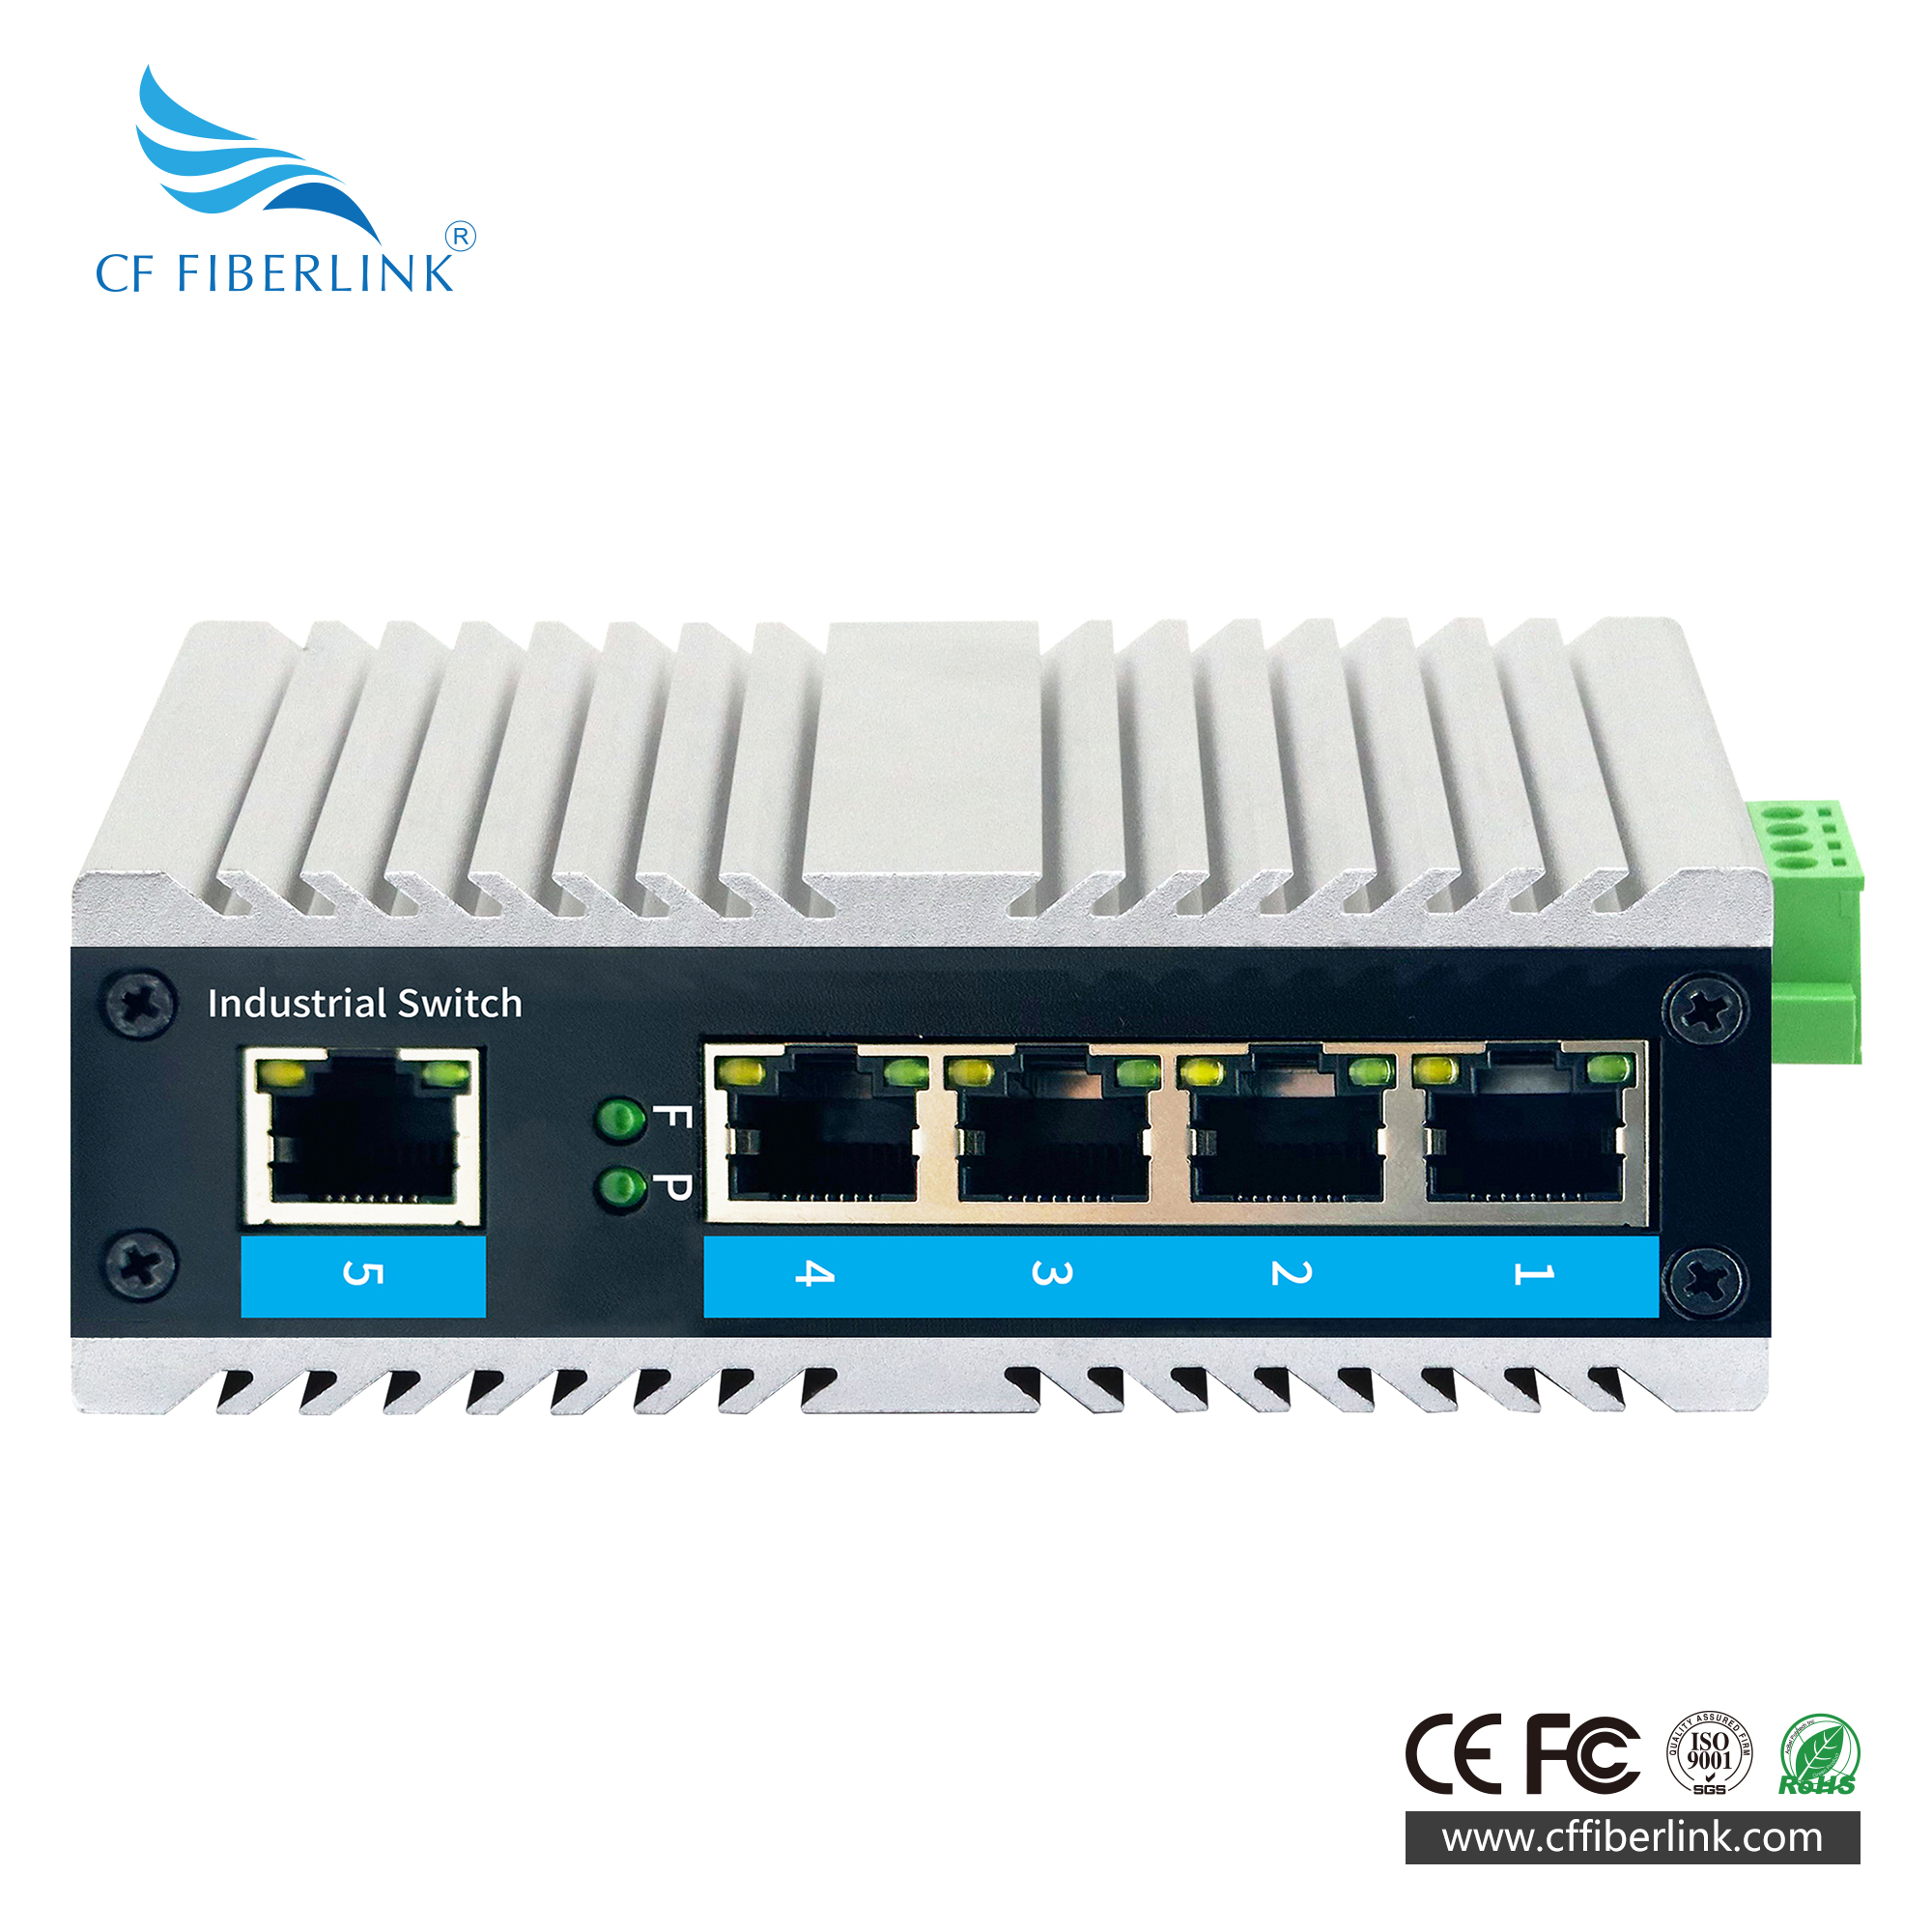 5-port 10/100/1000M Industrial Ethernet  Switch Featured Image